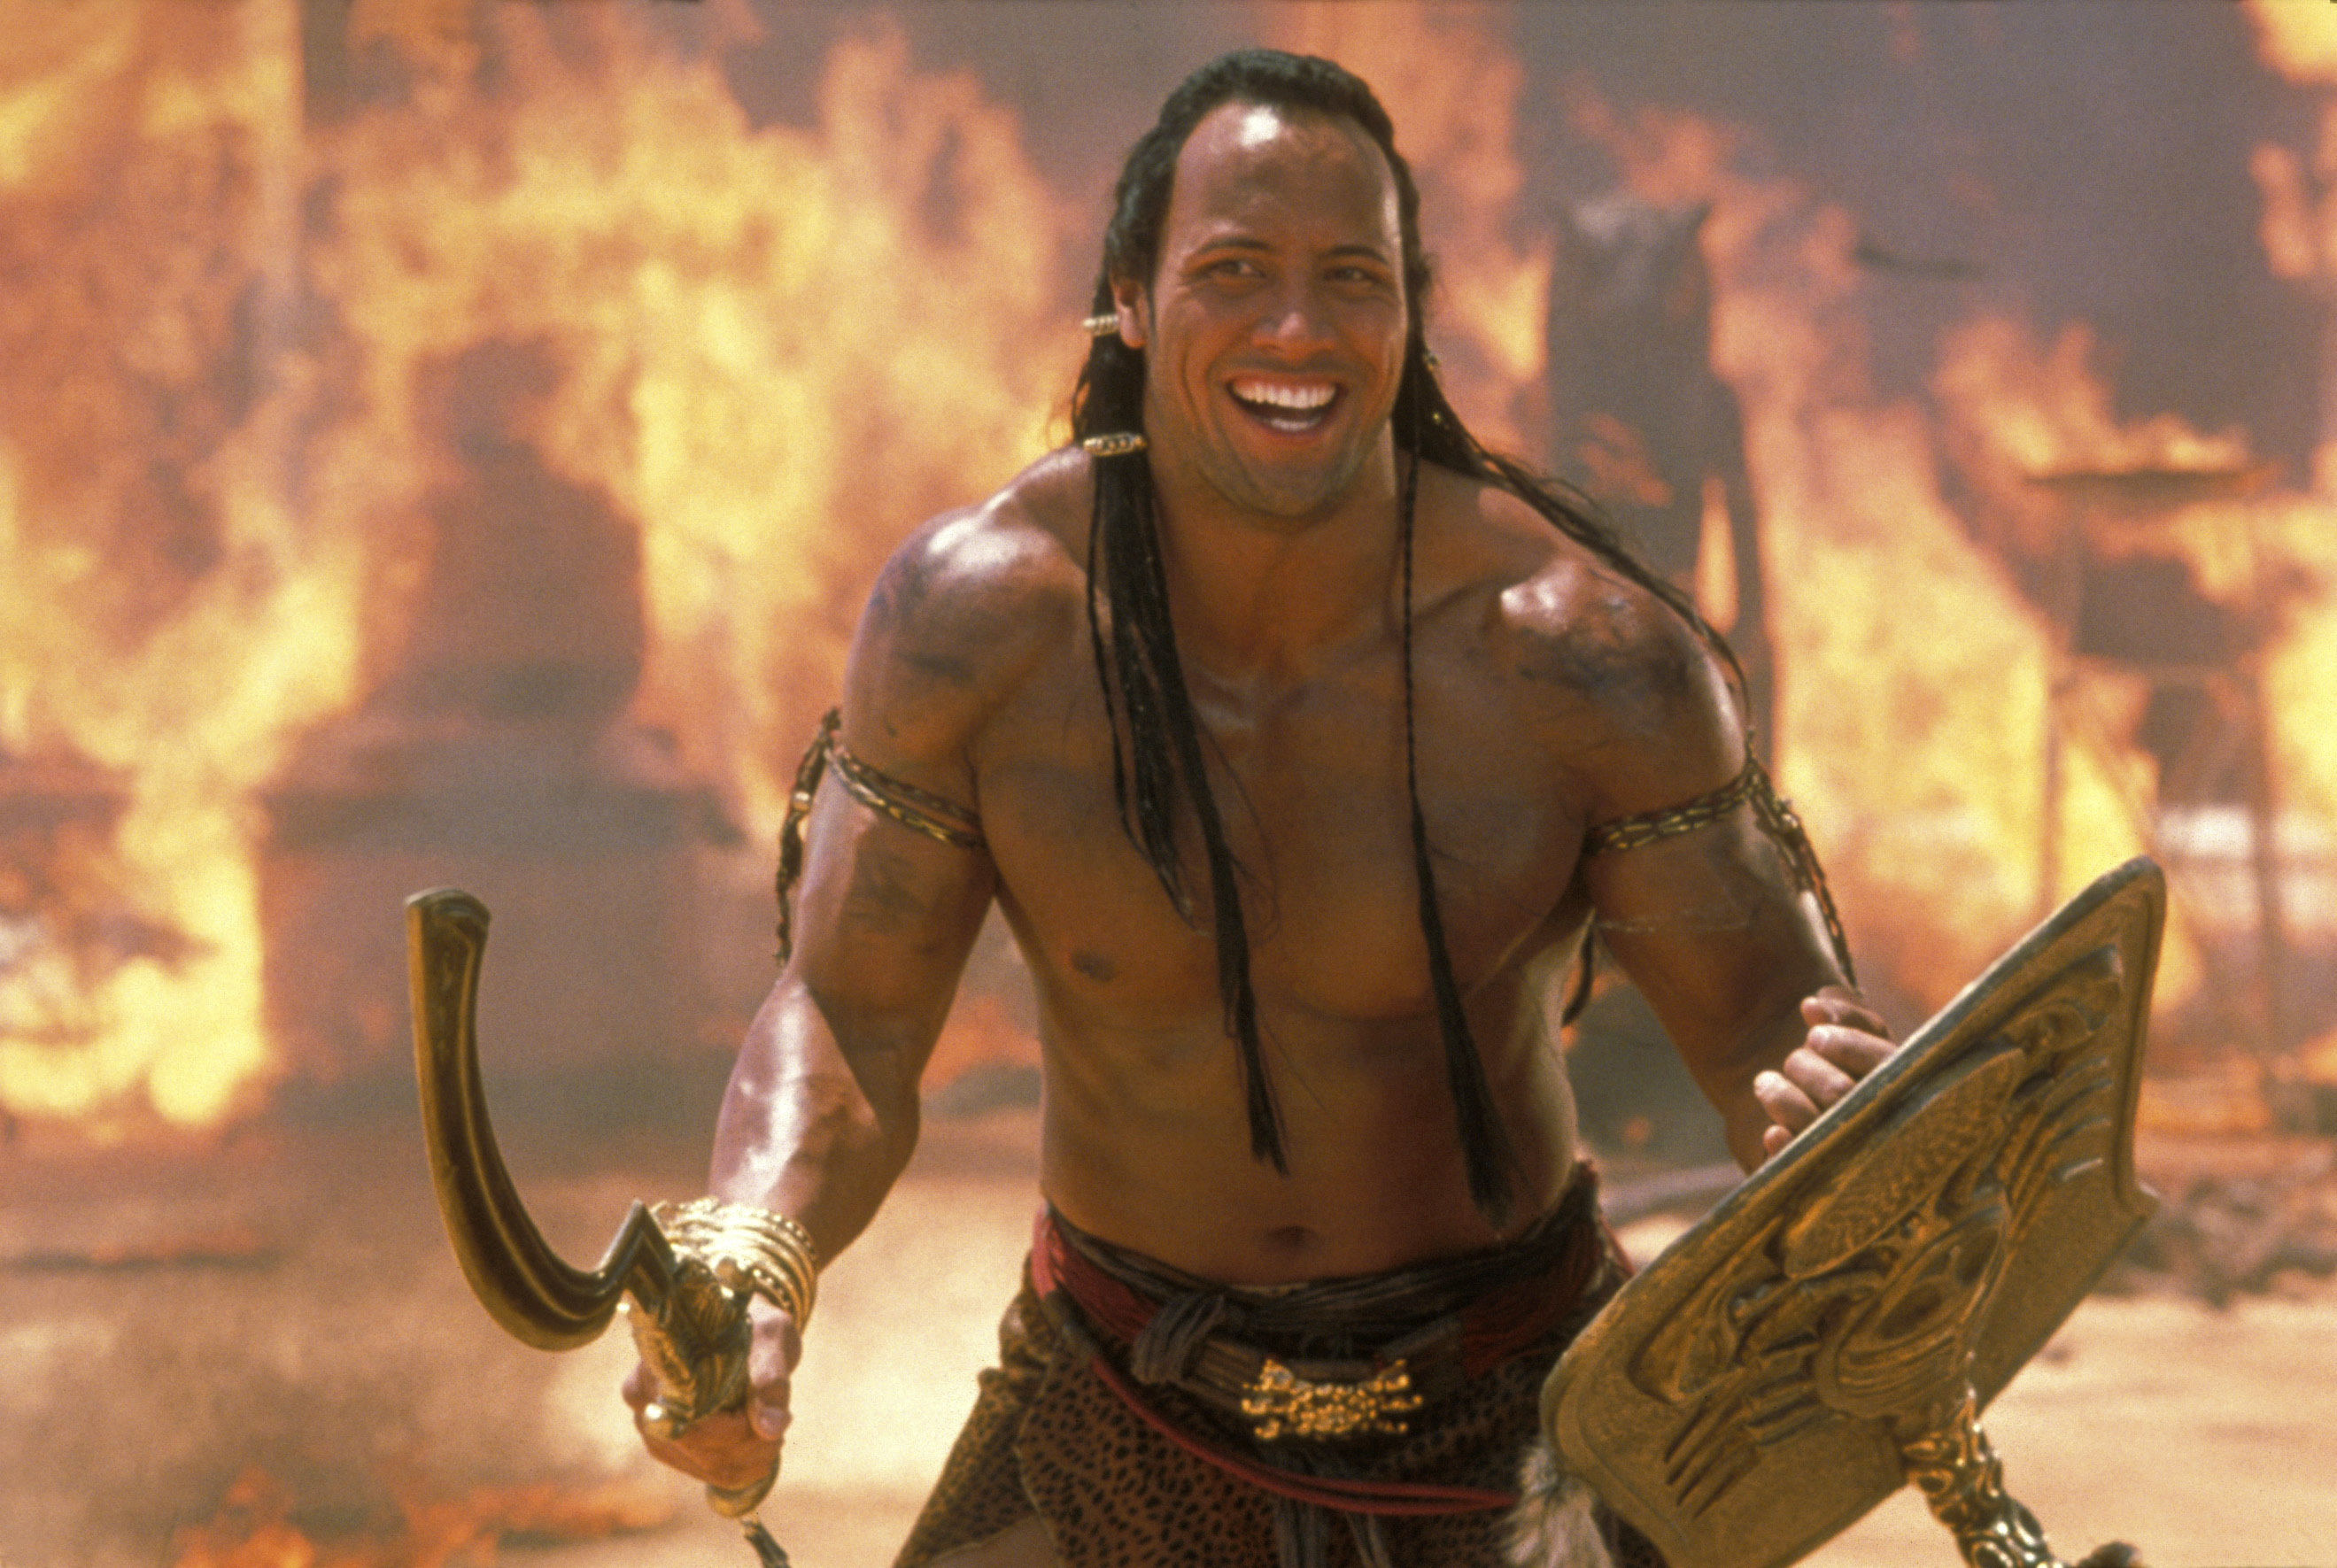 Dwayne Johnson in a warrior costume with a sword and shield smiling in front of a blazing backdrop